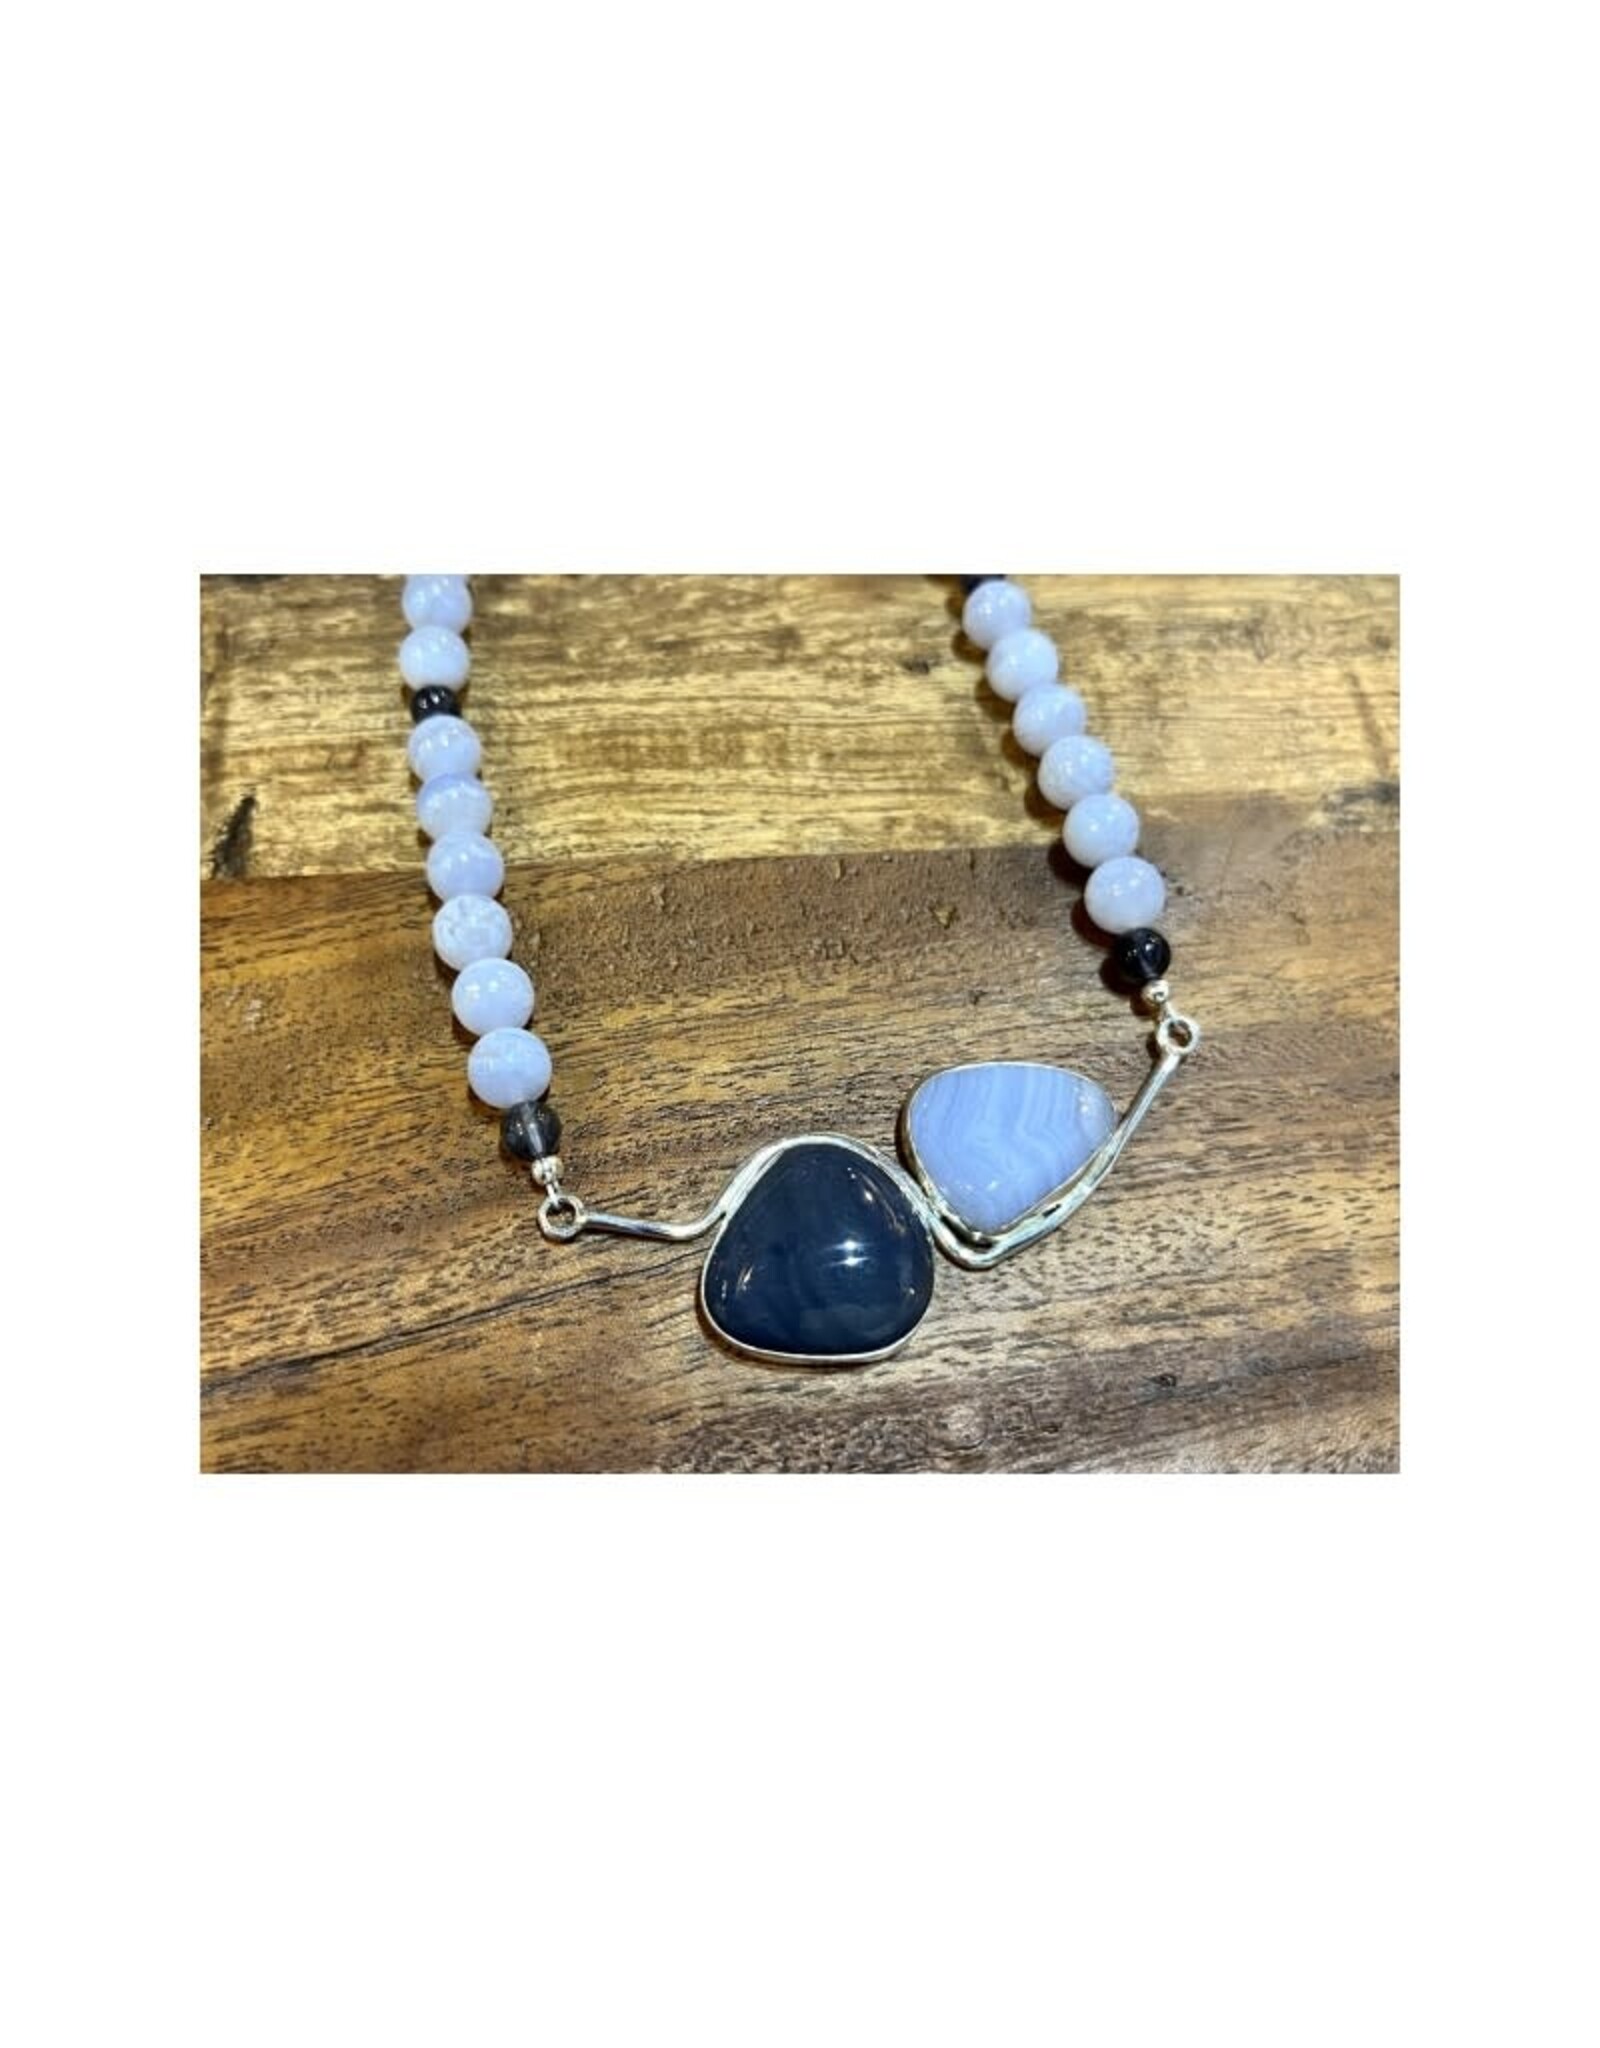 Boho Blue Lace Agate Necklace Layering Choker in Small Chunky Copper -  ArticArts by M. Martiniuk